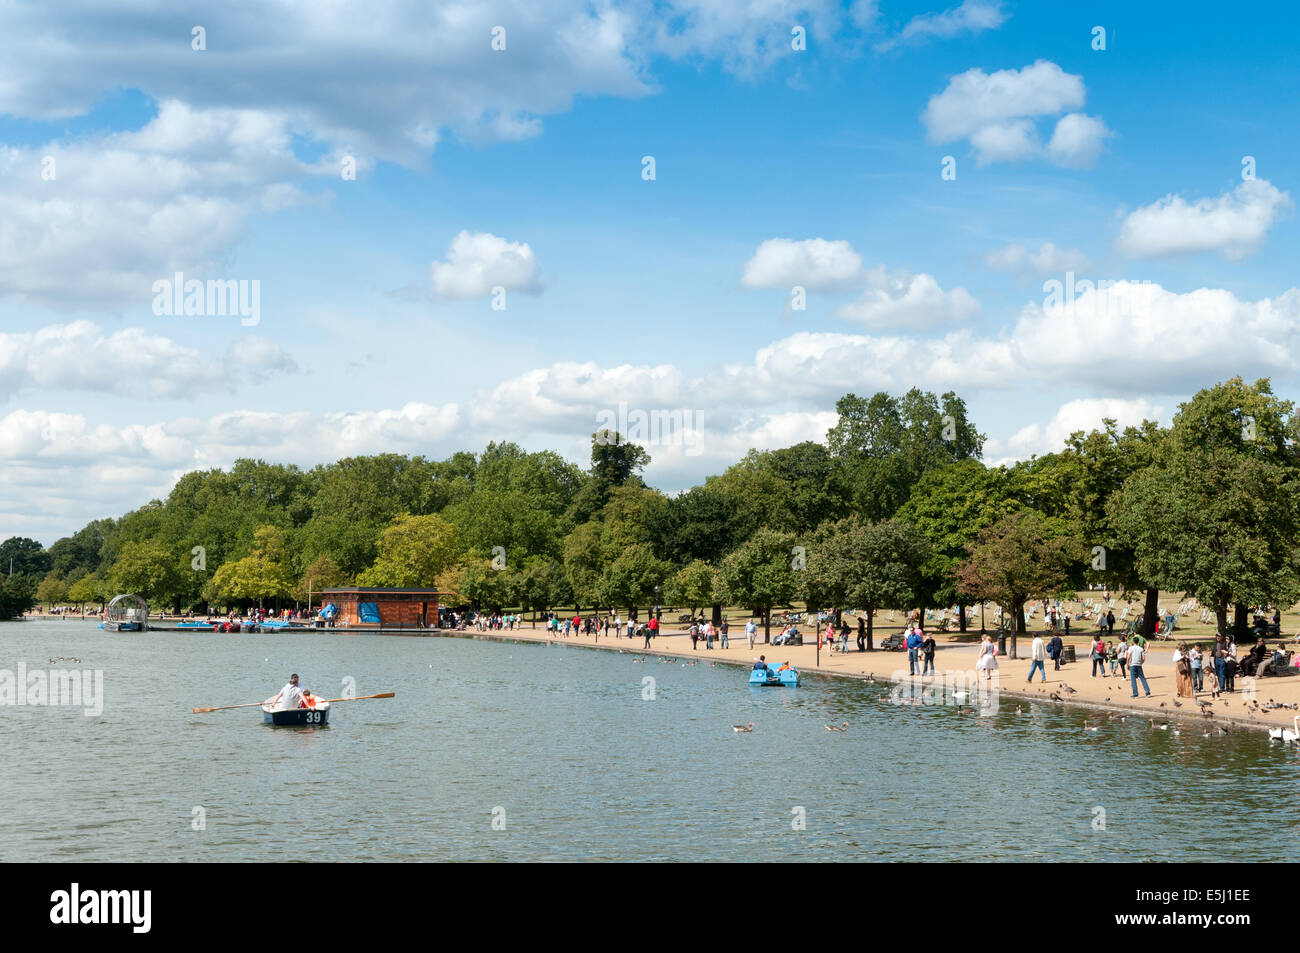 The Serpentine lake in Hyde Park, London, UK Stock Photo